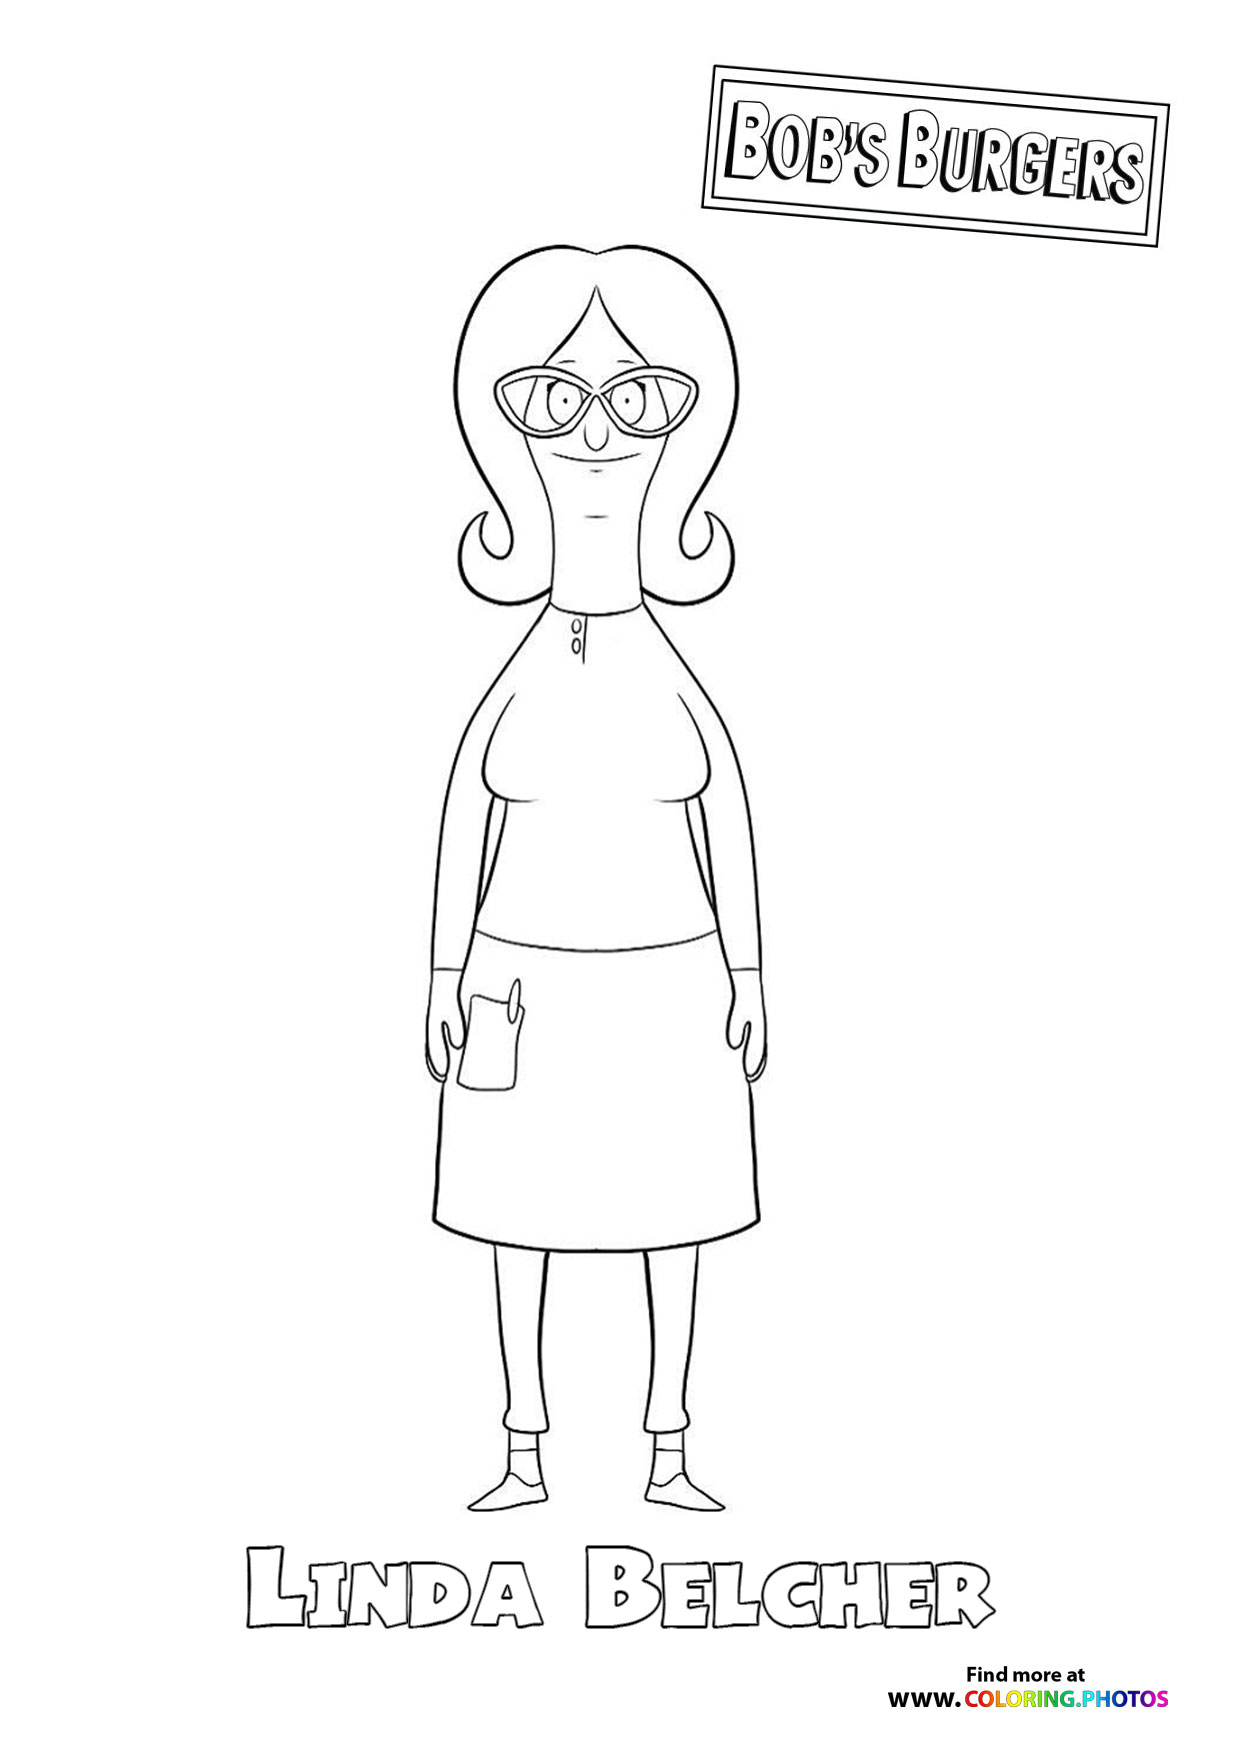 Bob's Burgers Coloring Pages Printable